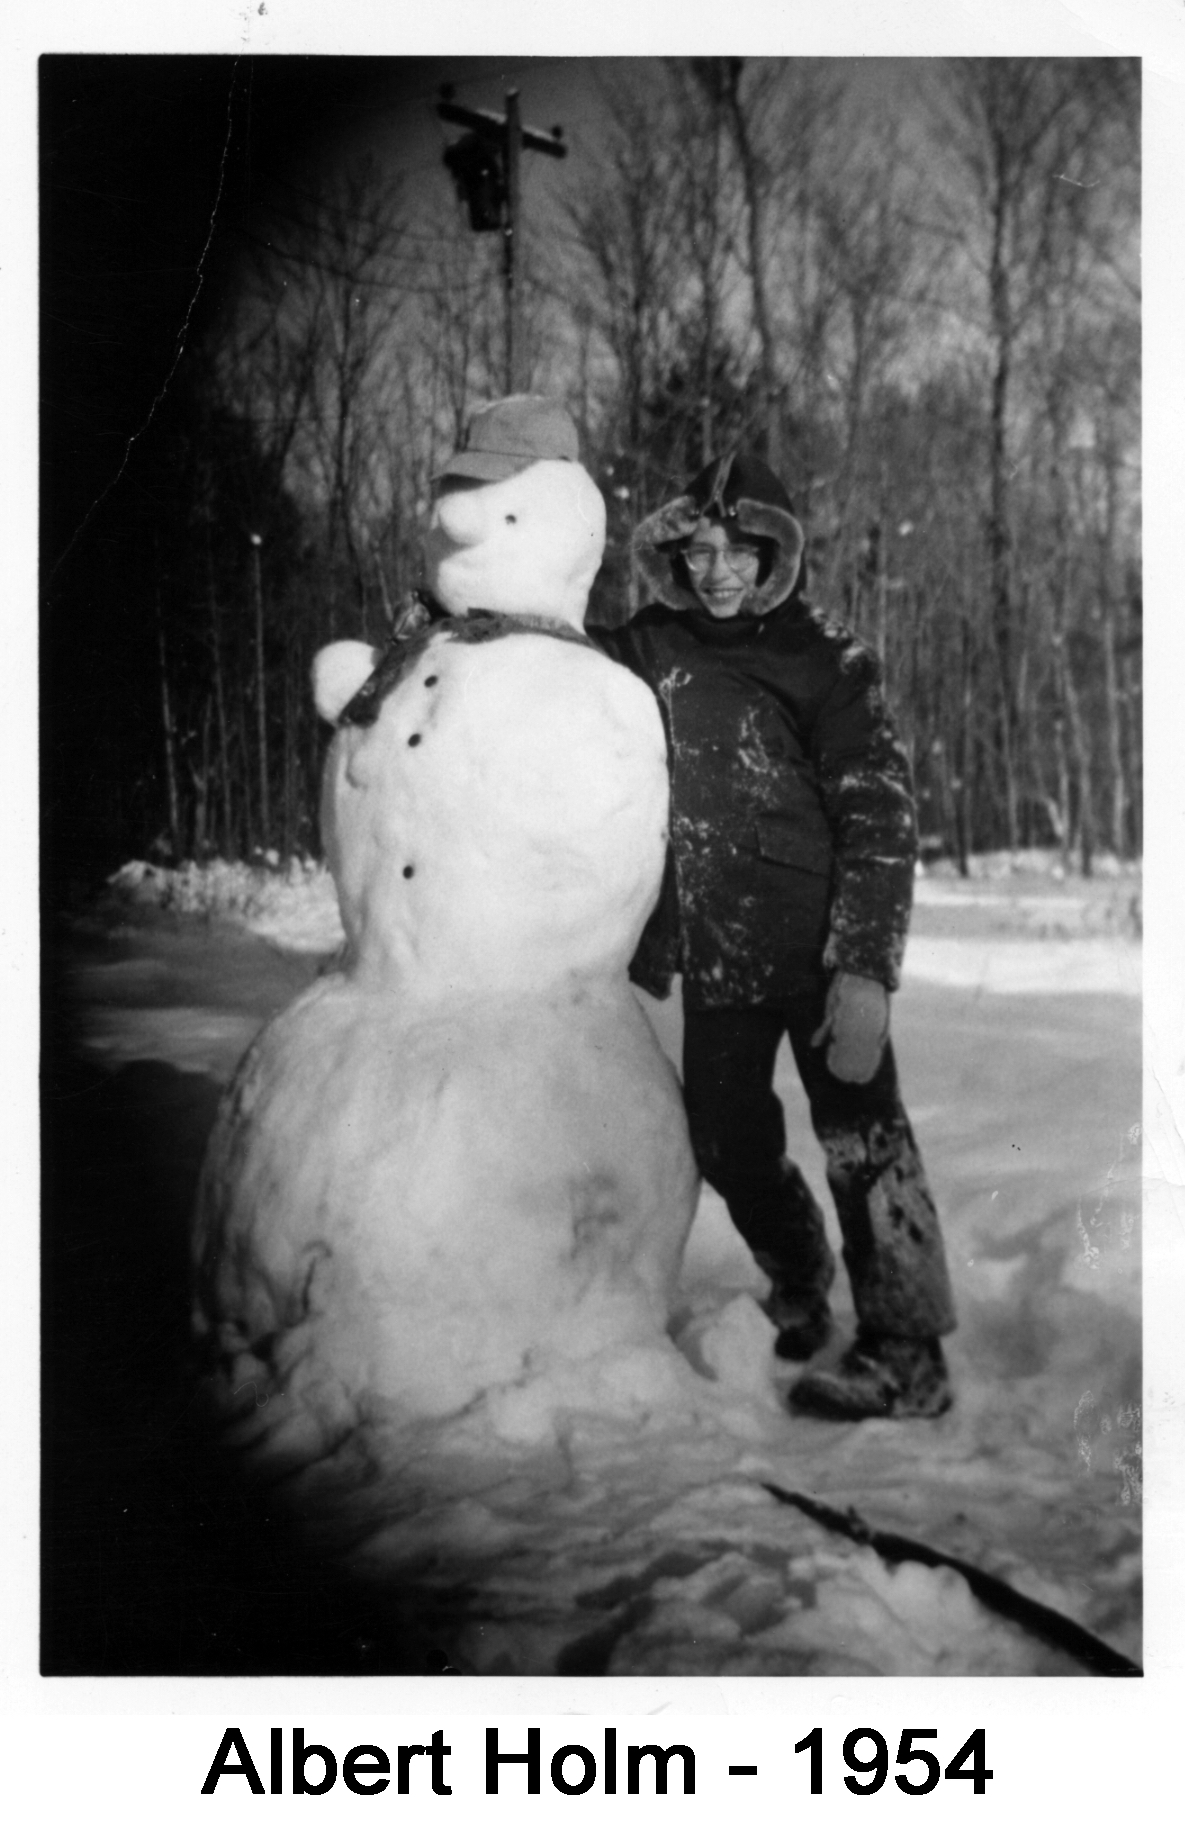 Albert in a hooded snowsuit is leaning against and hugging a snowman as tall as he is